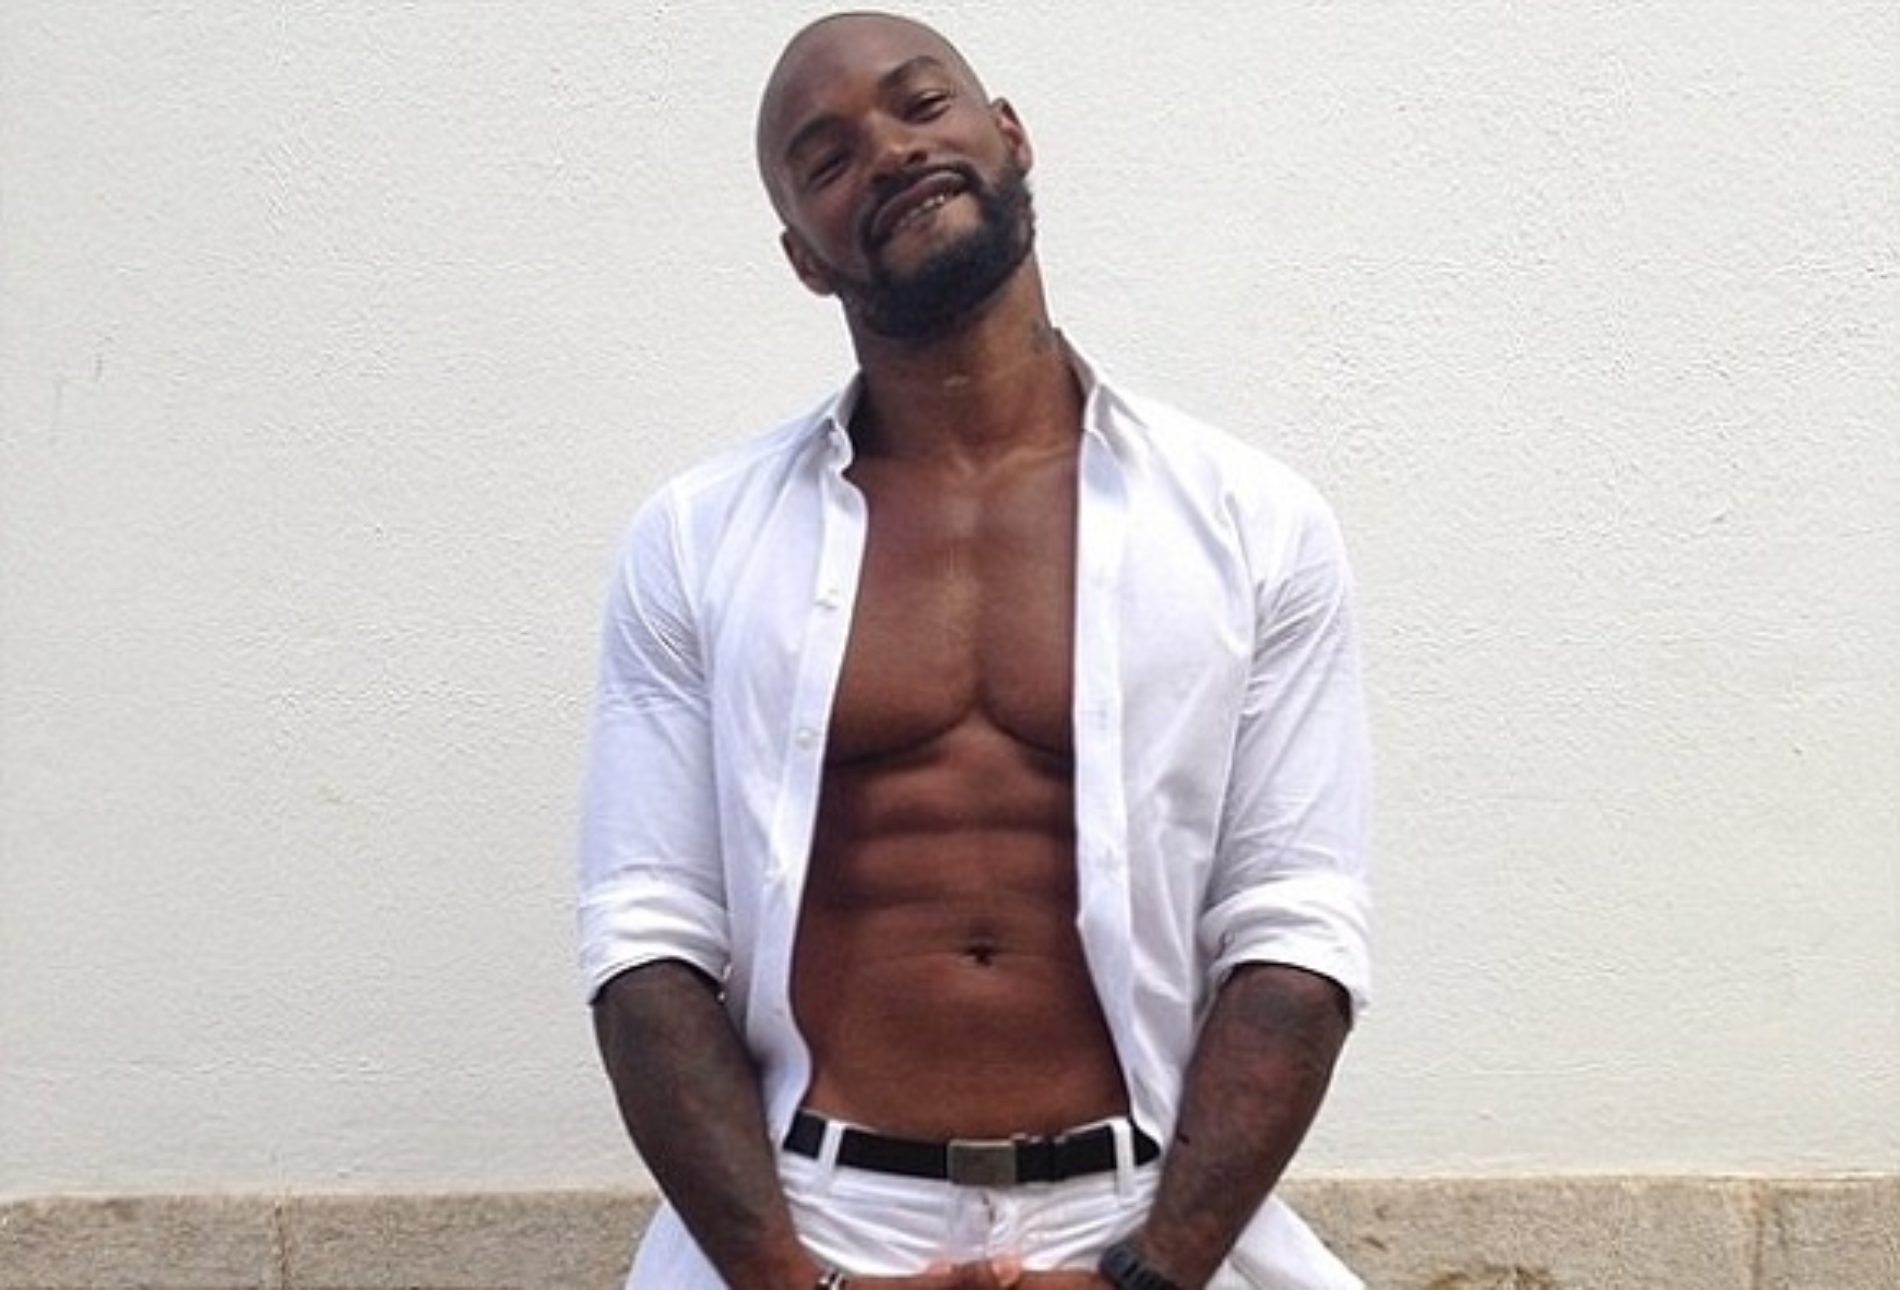 Tyson Beckford, next time, could you turn slowly around to face the camera?...